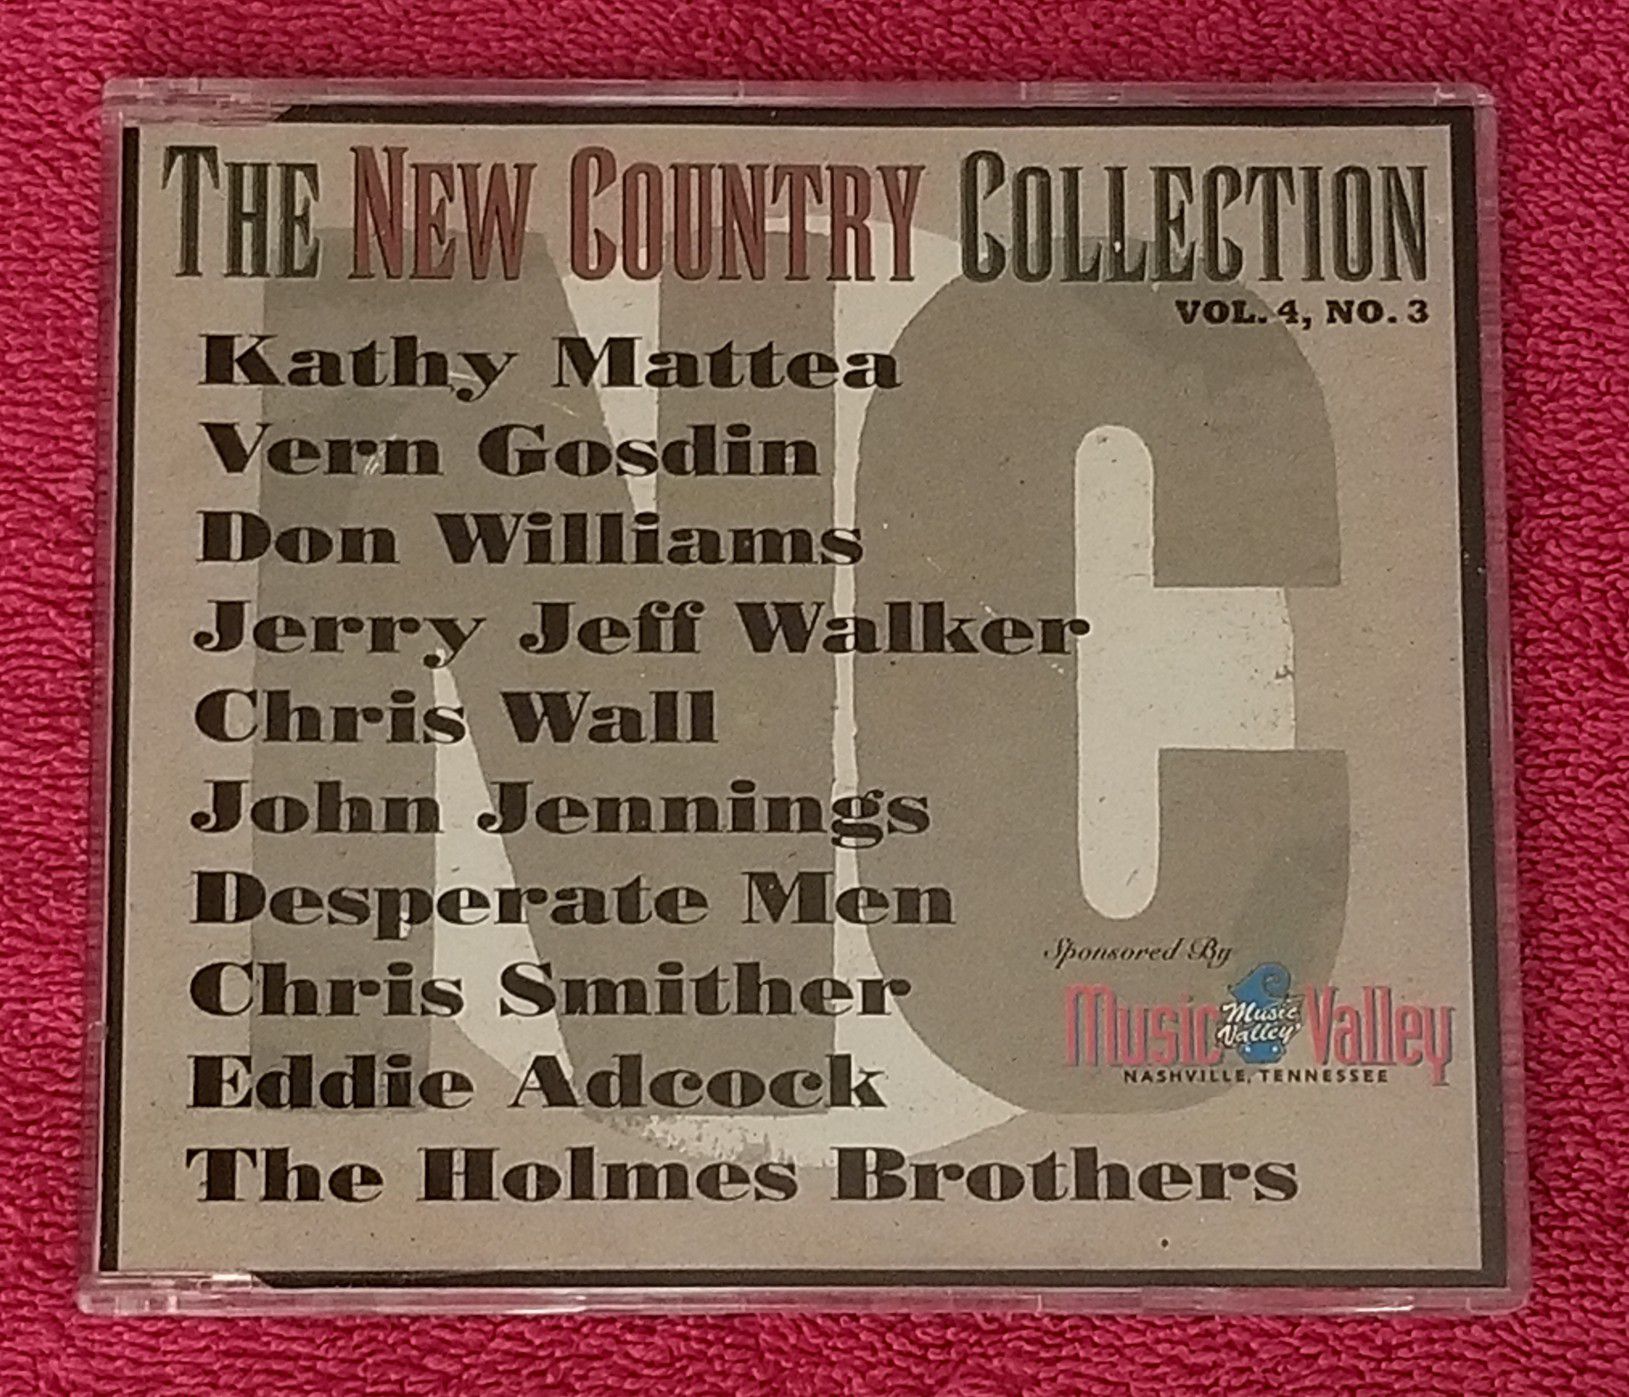 The Country Collection Vol.4, No.3 CD 1997